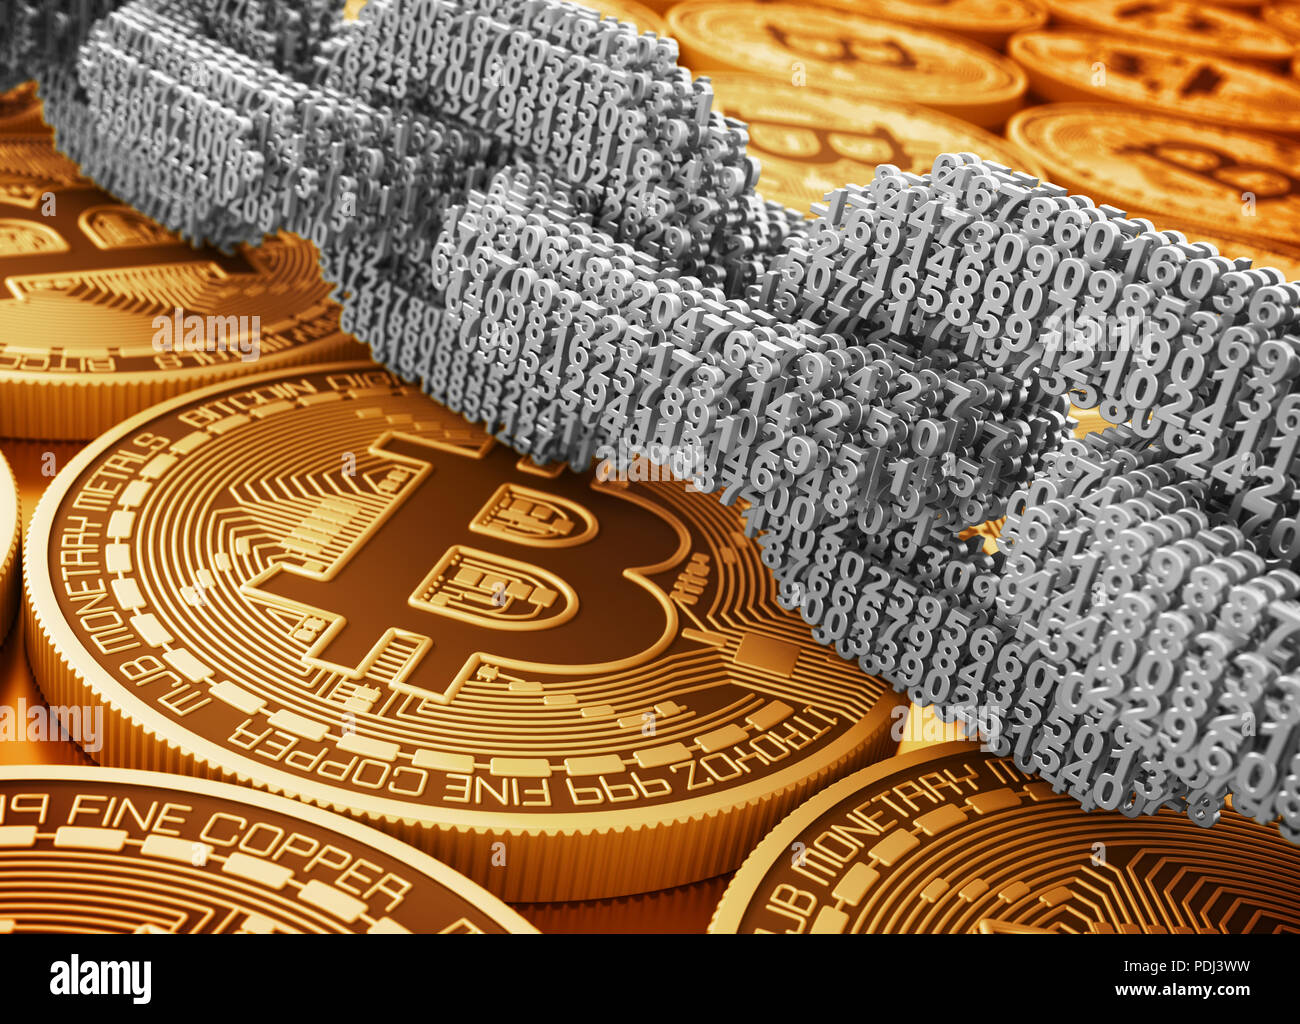 Silver Digital Chain Of Interconnected 3D Numbers And Golden Bitcoins. 3D Illustration. Stock Photo